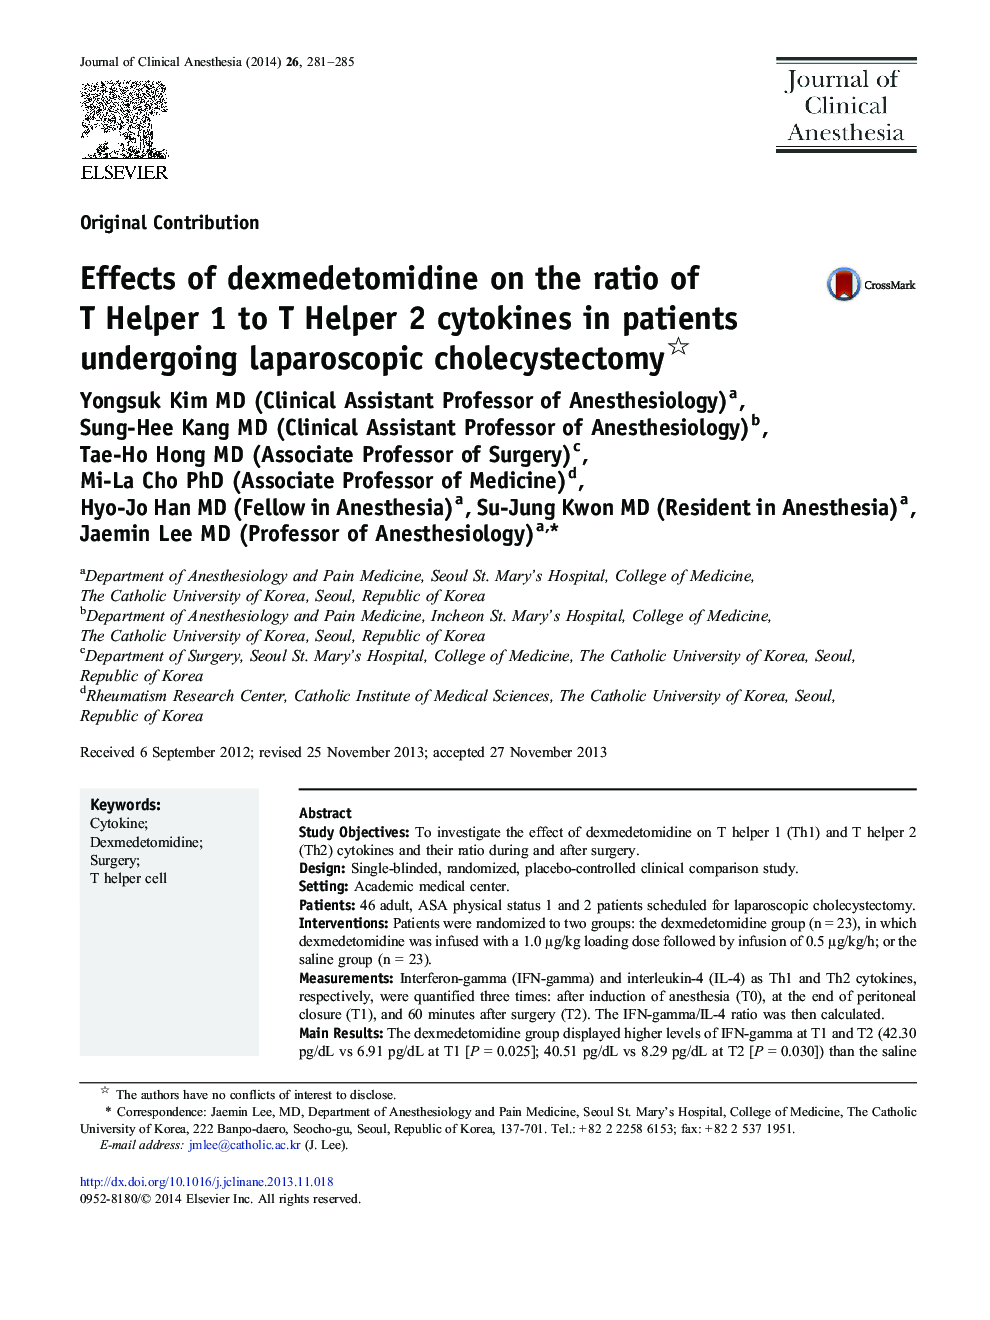 Effects of dexmedetomidine on the ratio of T Helper 1 to T Helper 2 cytokines in patients undergoing laparoscopic cholecystectomy 